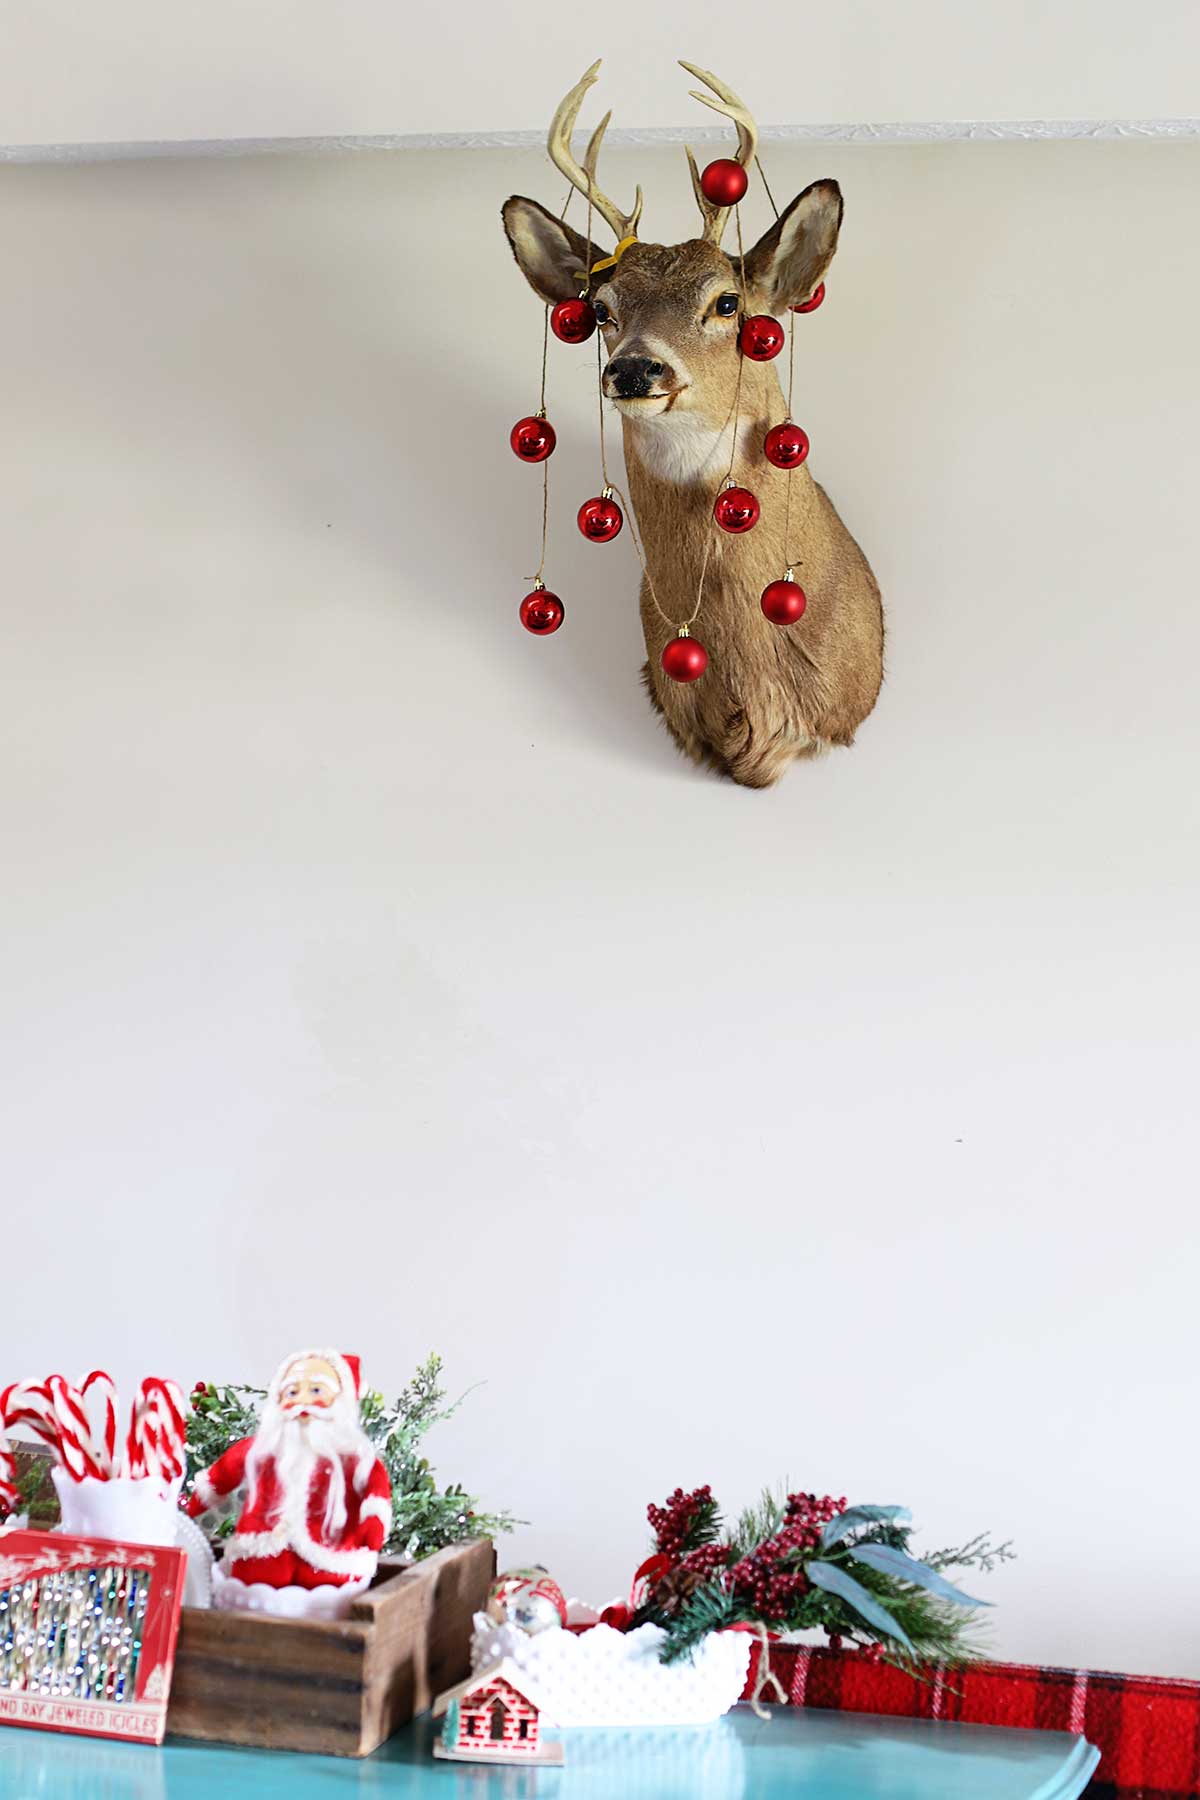 mounted deer head decorated for Christmas with round Christmas ornaments